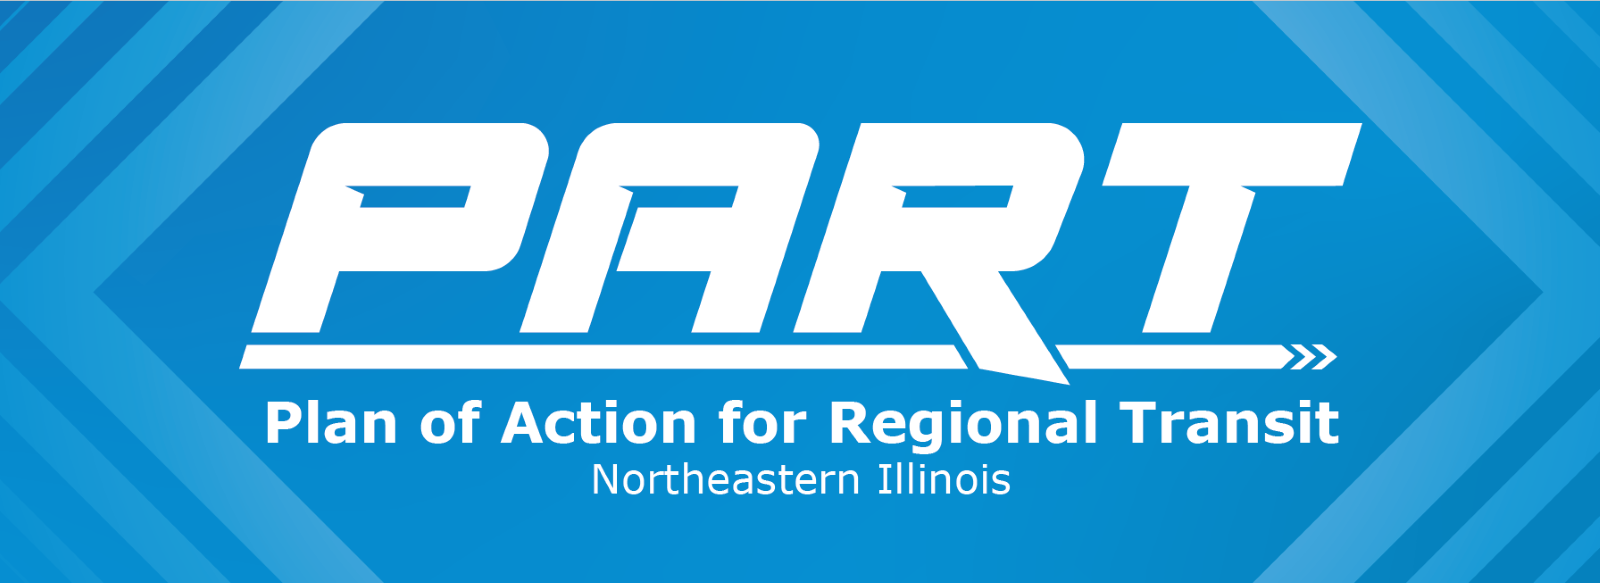 PART: Plan of Action for Regional Transit